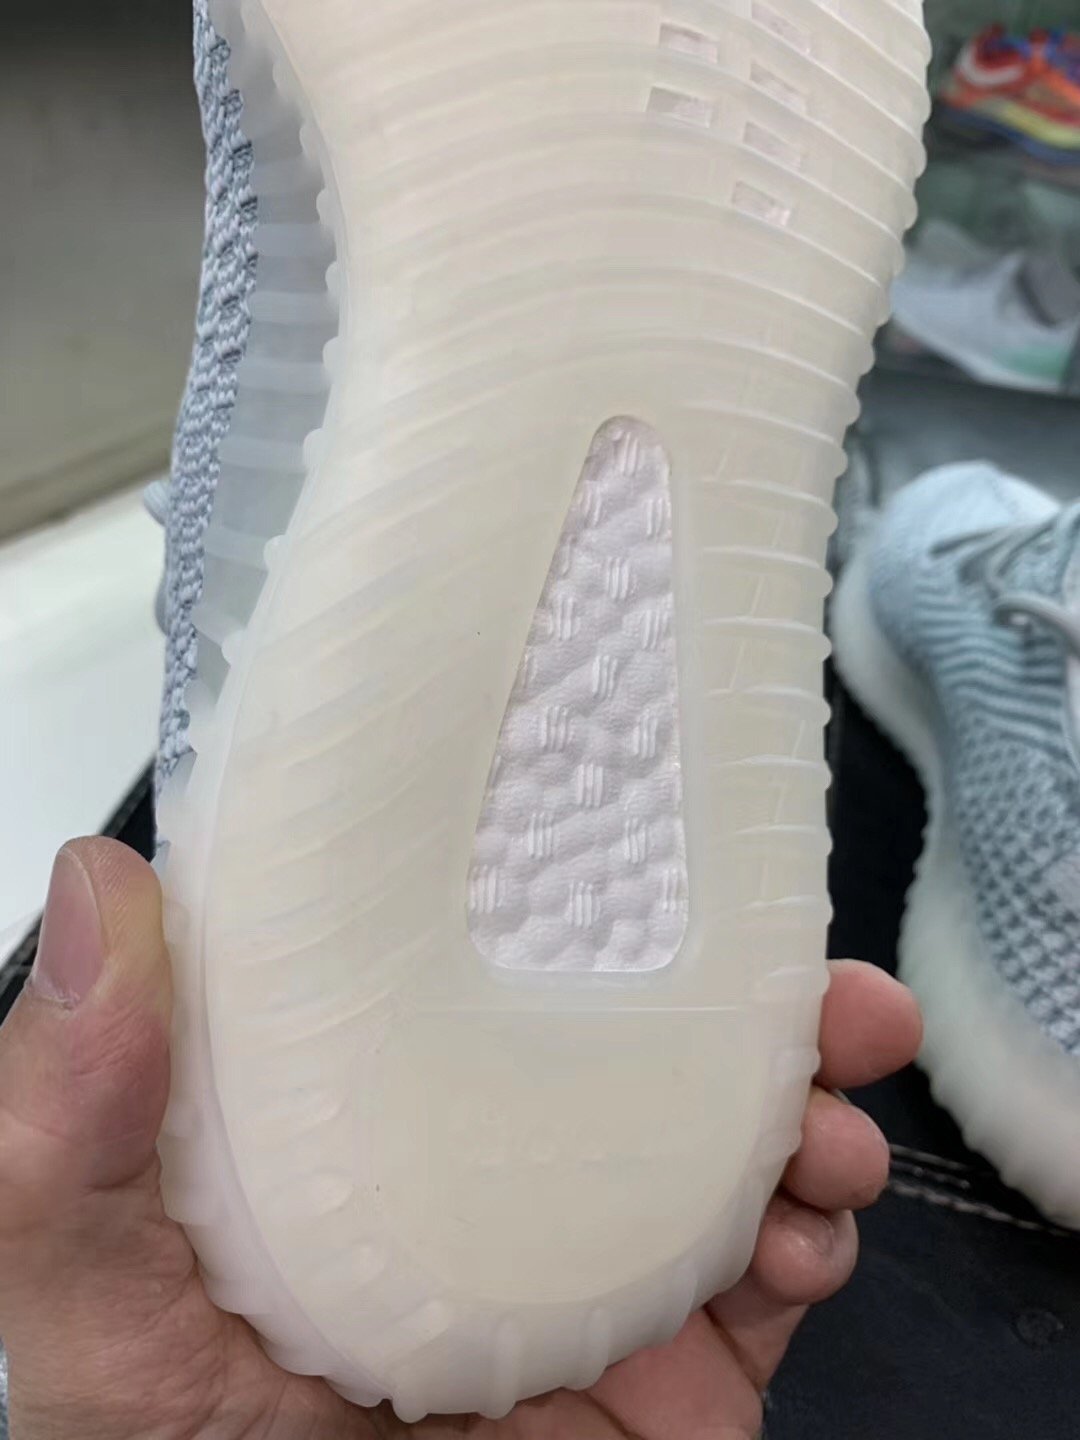 Cloud White adidas Yeezy Boost 350 V2 FW3043 Release Date